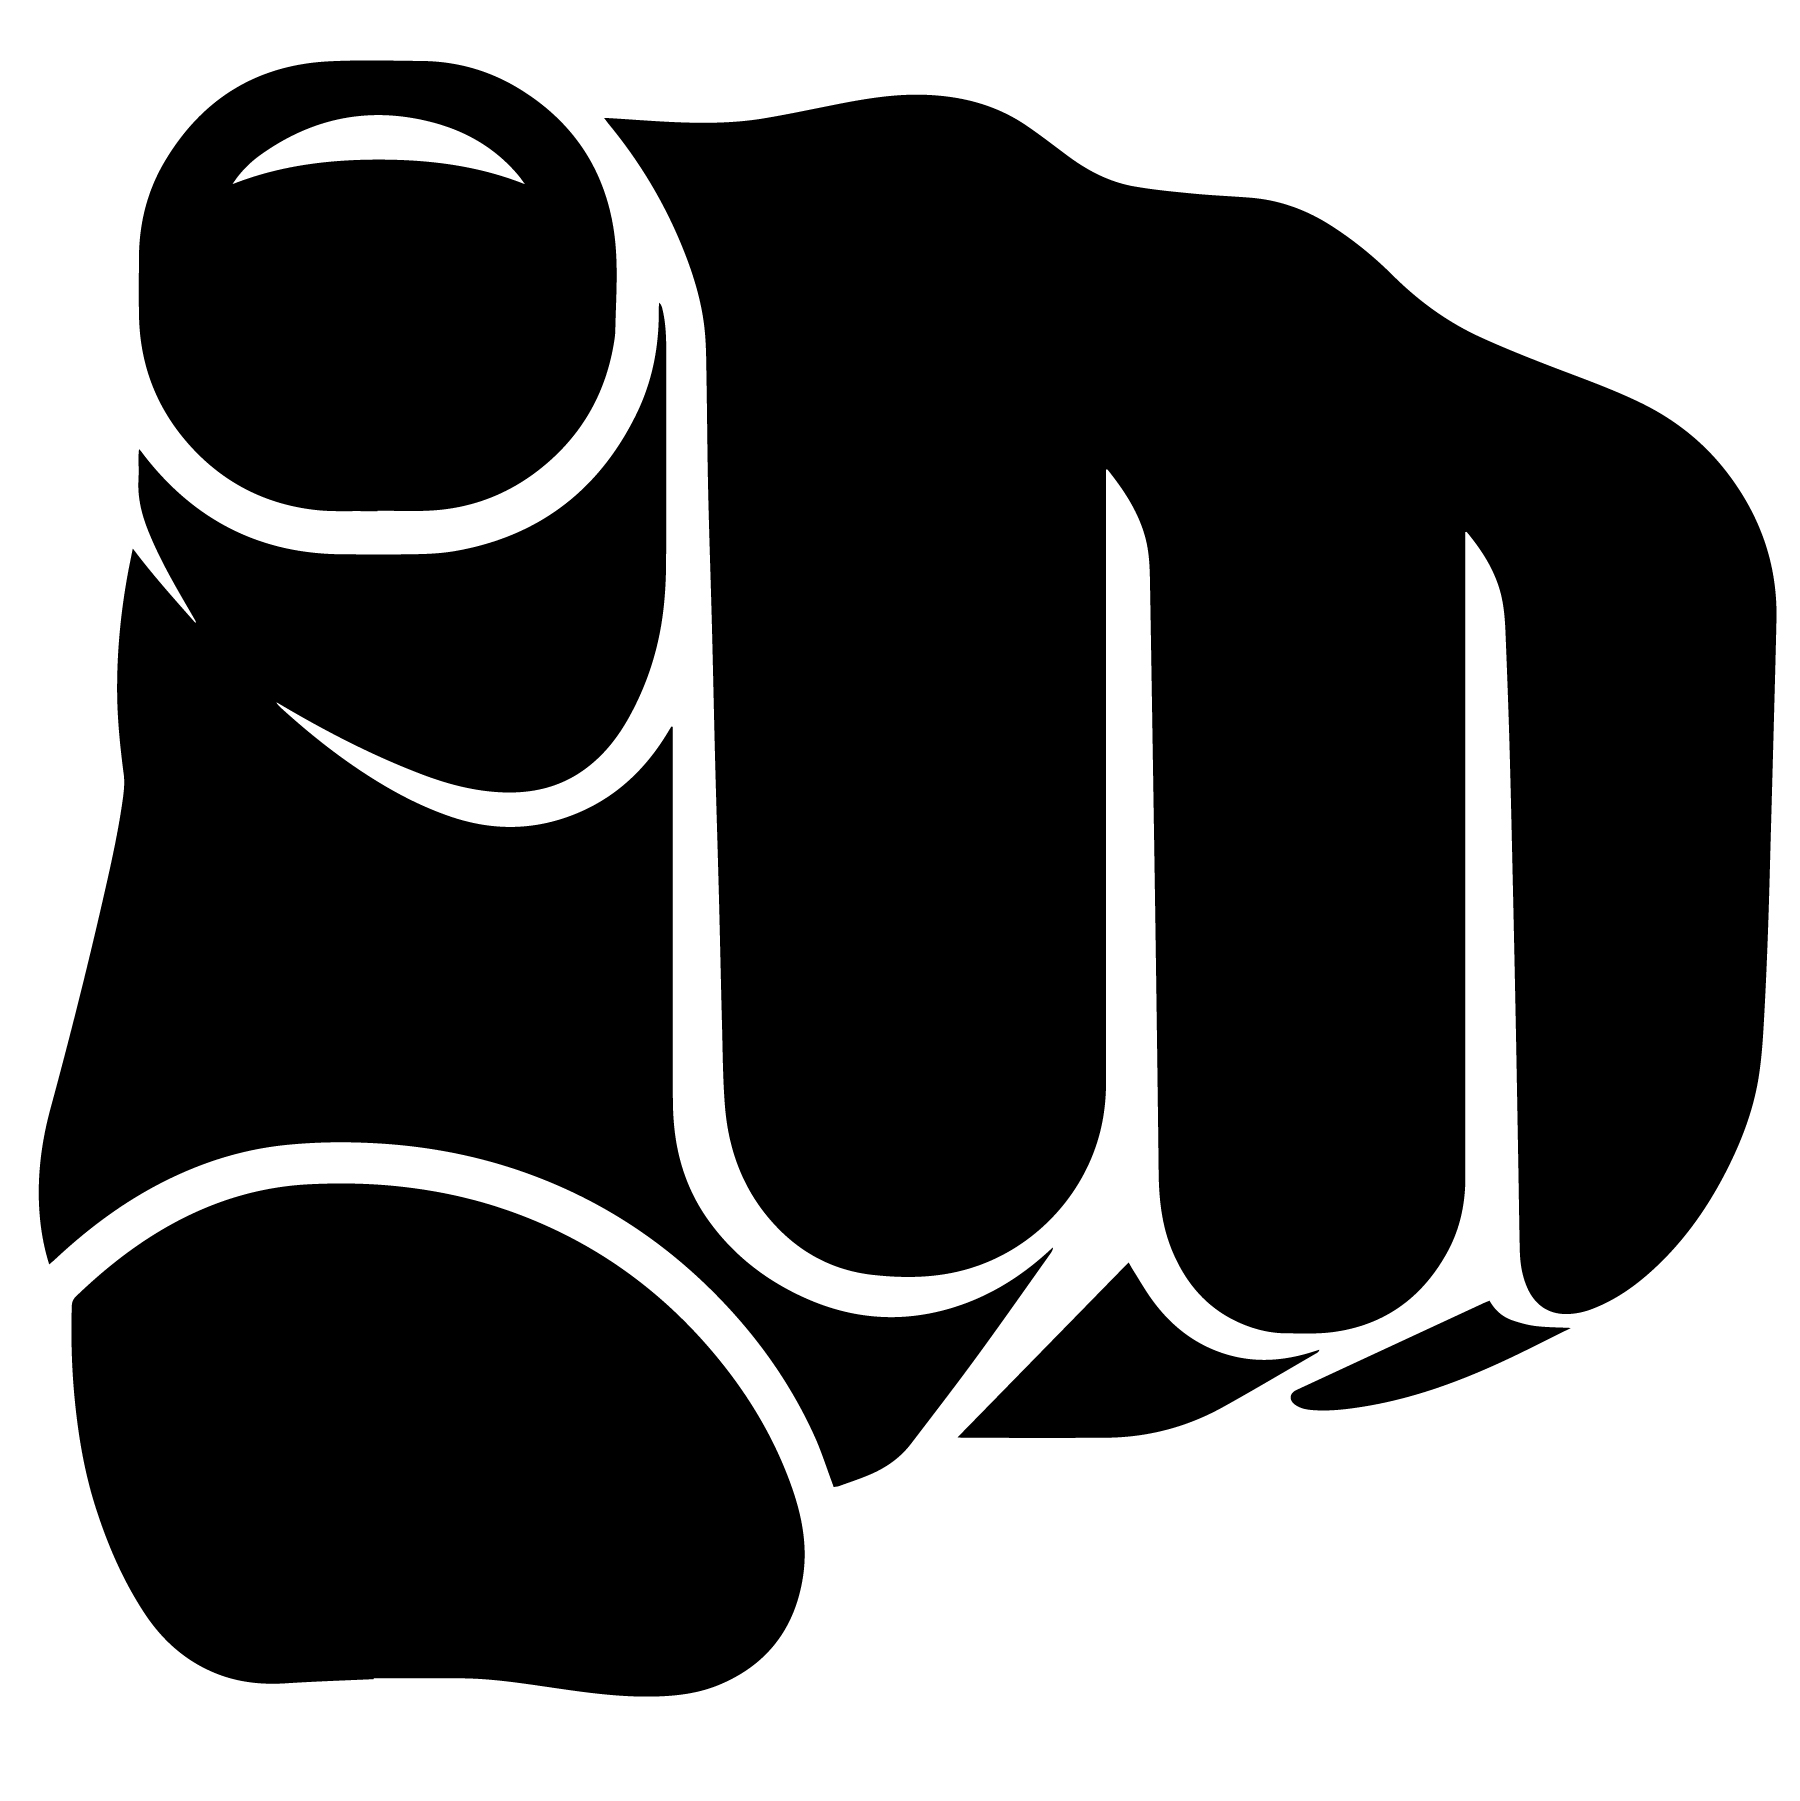 Download pointing finger vector - Download Free Vectors, Clipart ...